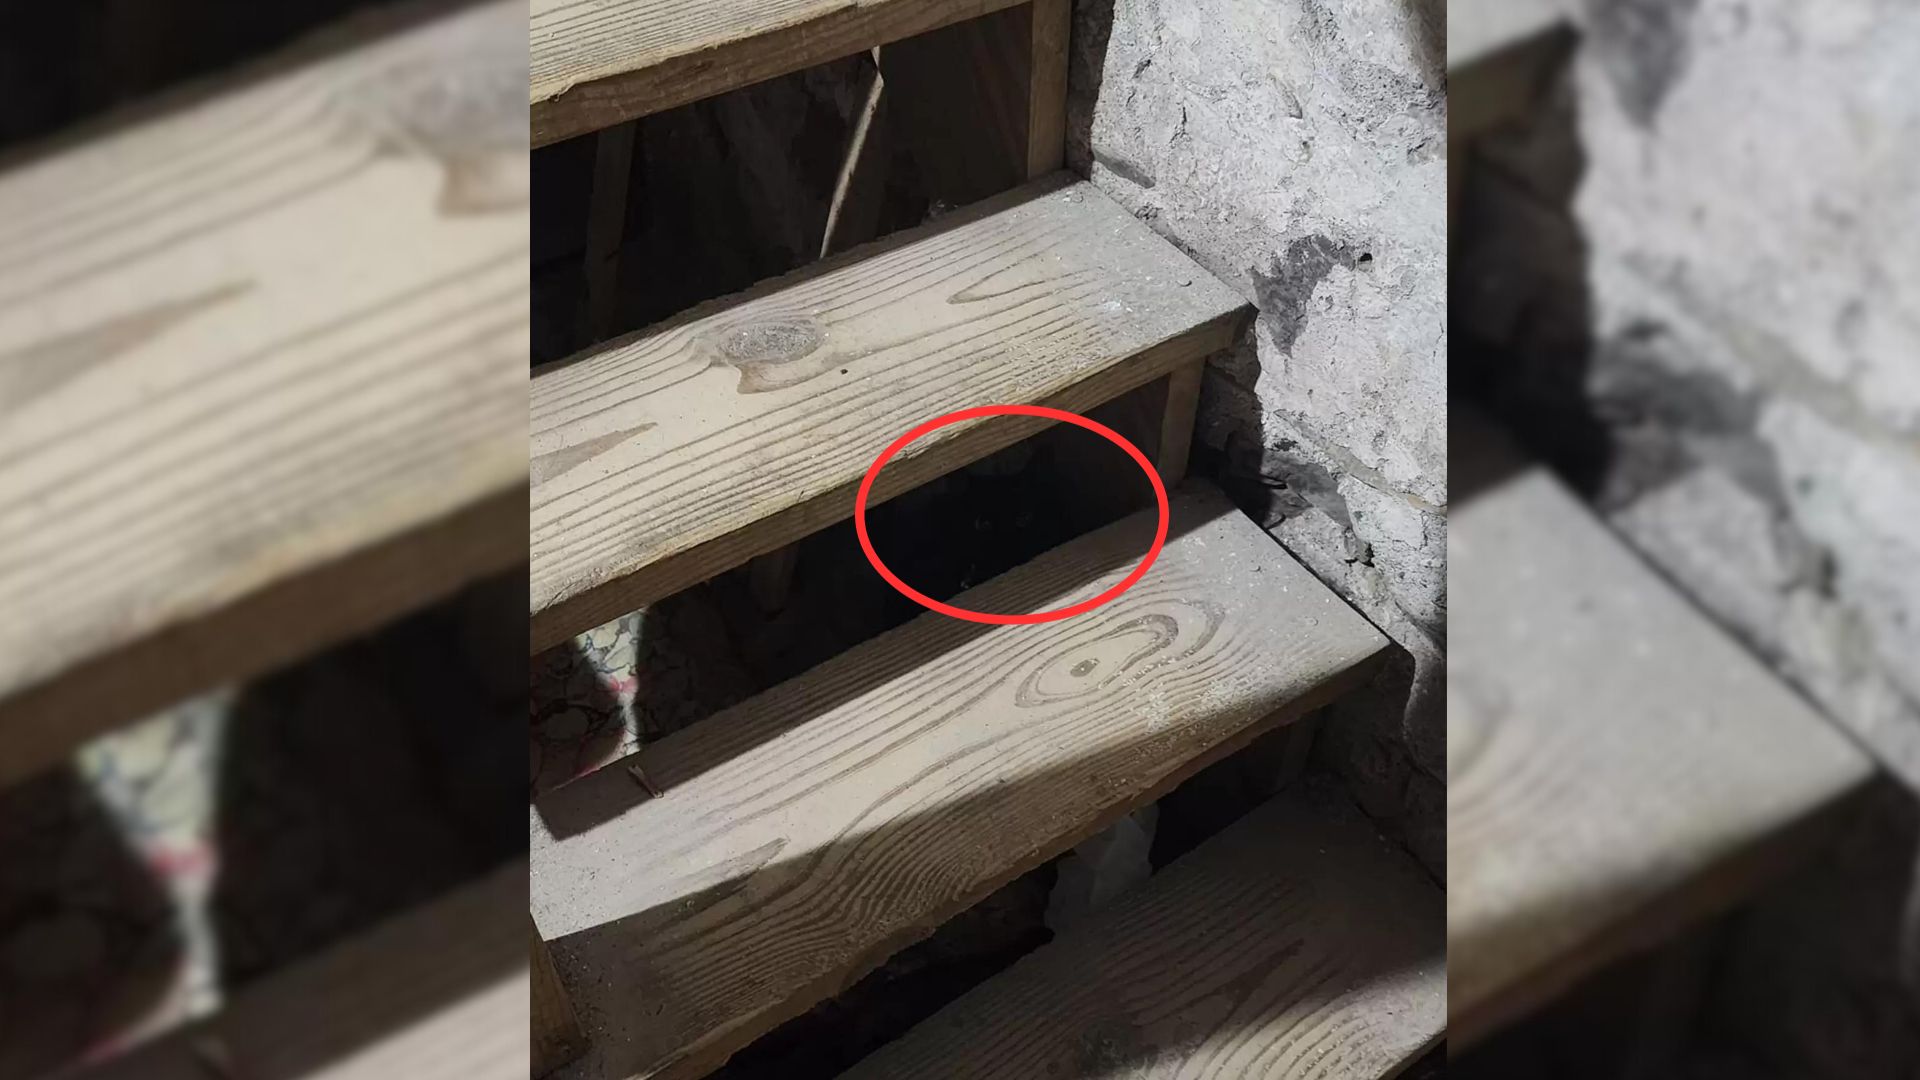 Woman Noticed Eyes Staring At Her From The Shadows And Screams Before Realizing What It Is